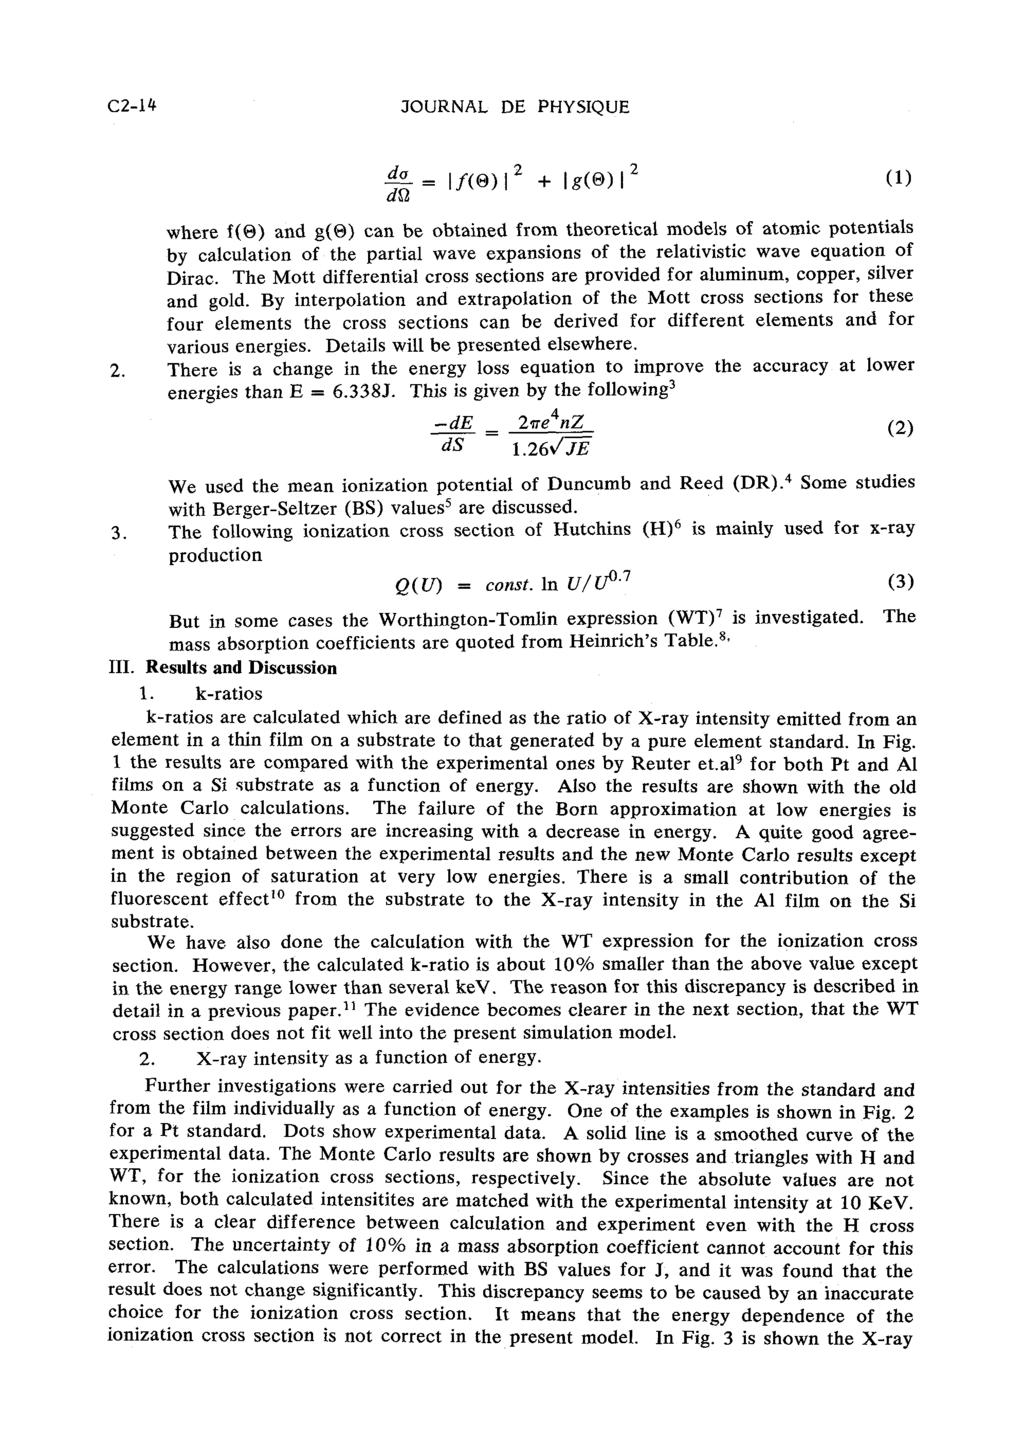 JOURNAL DE PHYSIQUE where f(0) and g(0) can be obtained from theoretical models of atomic potentials by calculation of the partial wave expansions of the relativistic wave equation of Dirac.